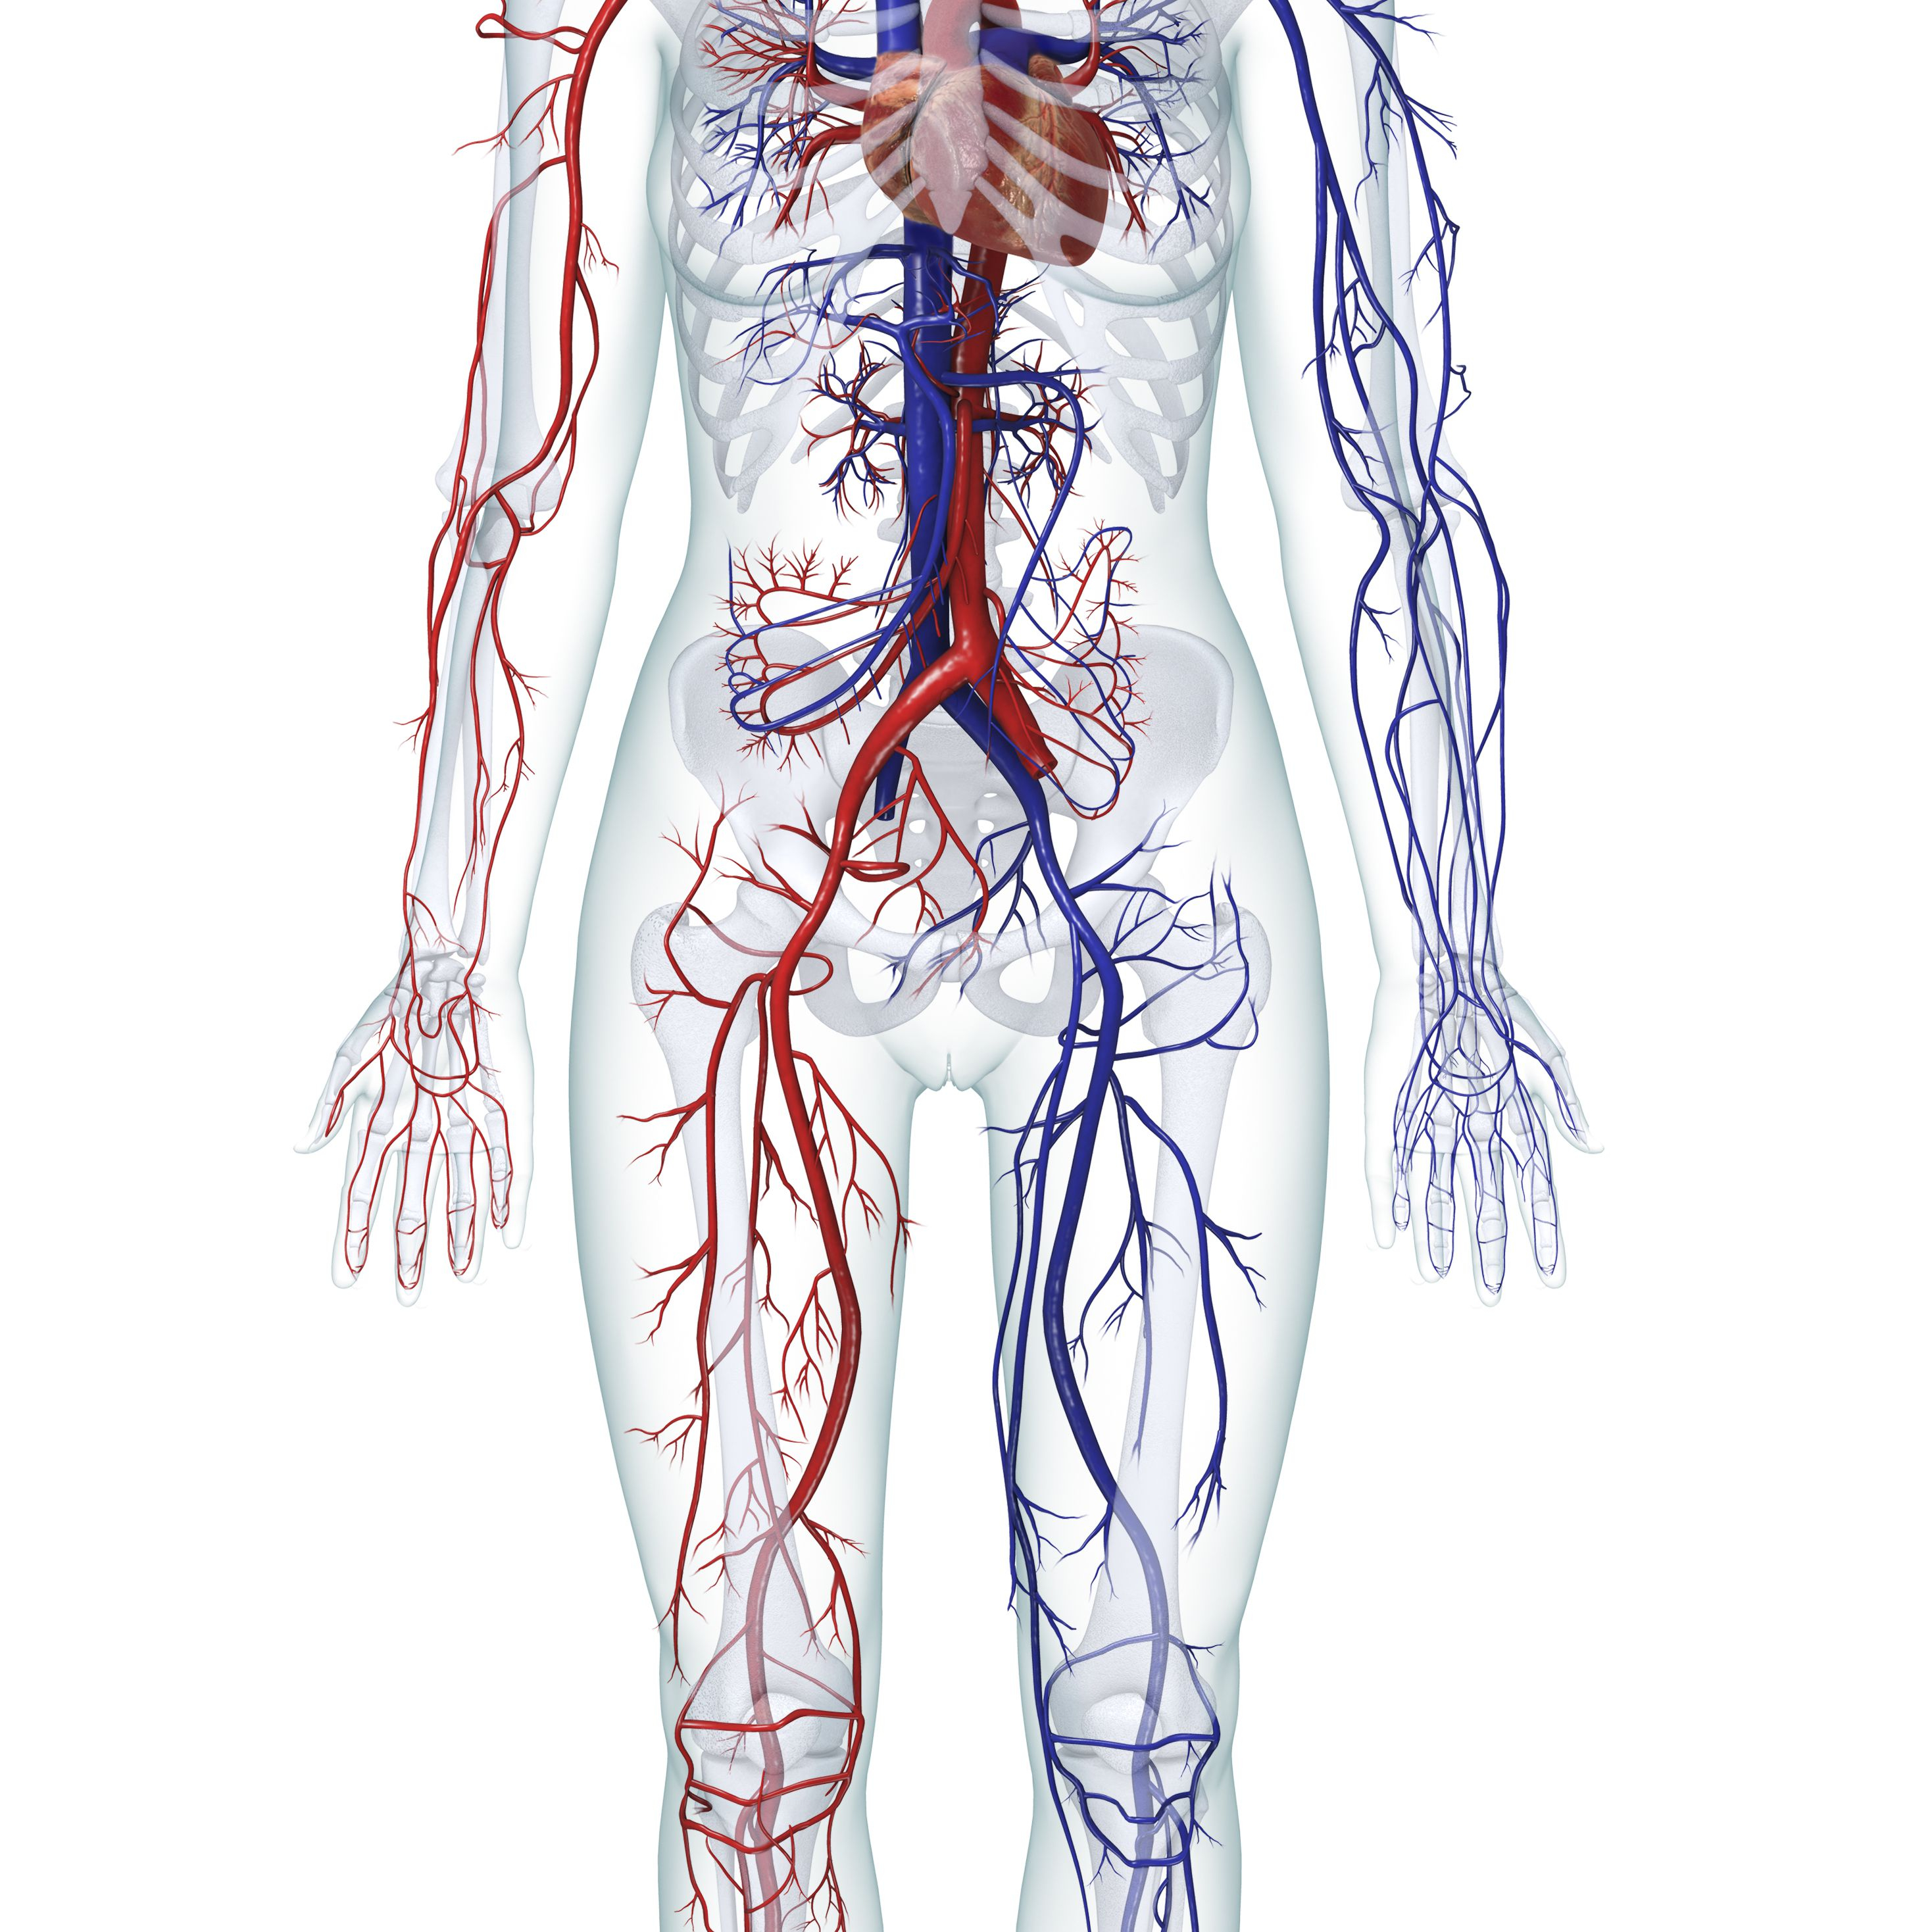 Diagram Of Human Organs Learn About The Organ Systems In The Human Body